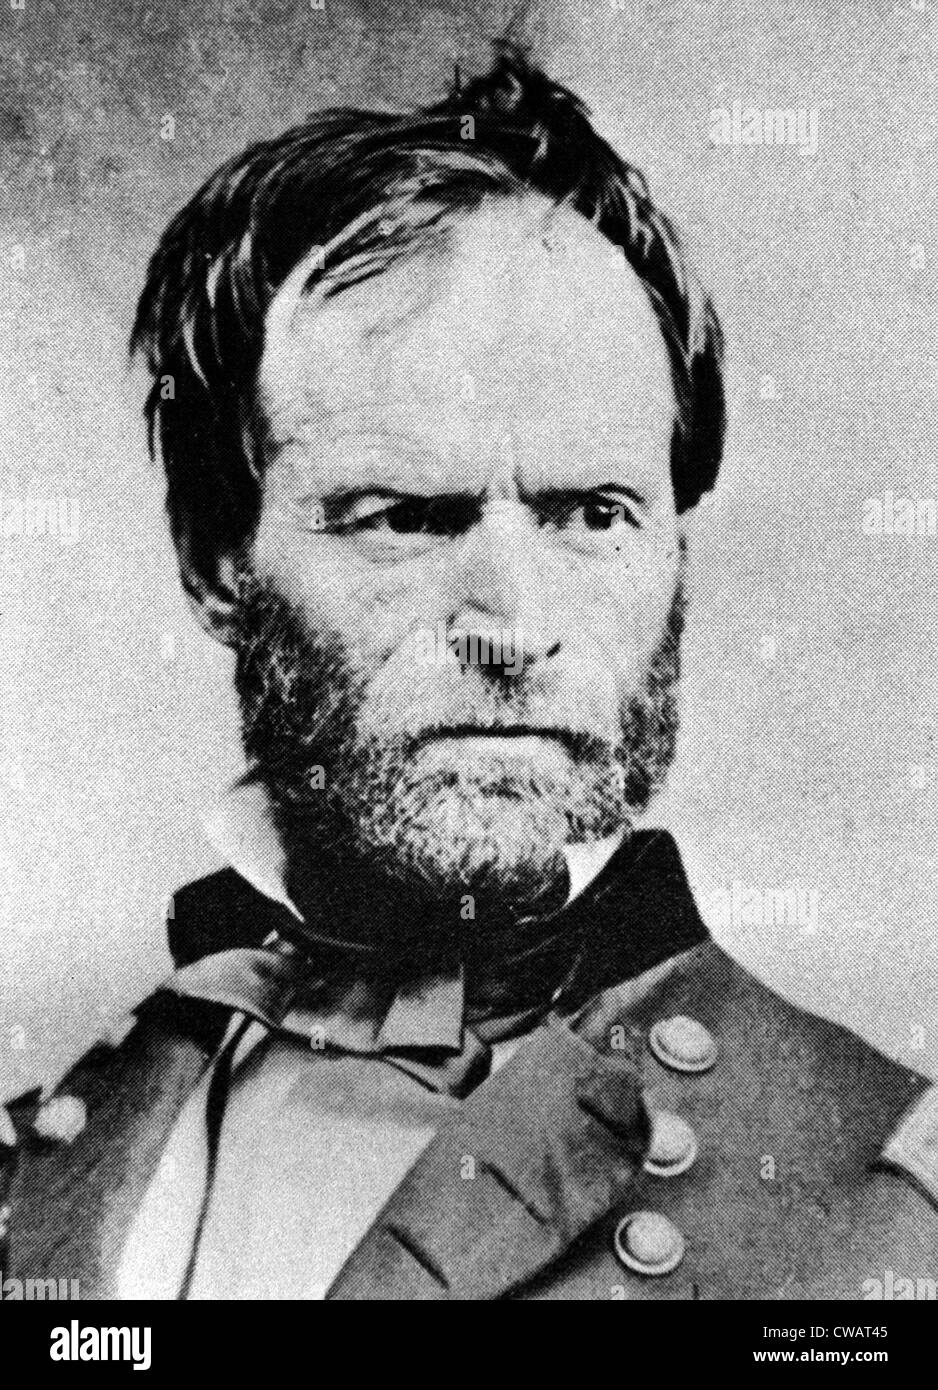 William Tecumseh Sherman, during the Civil War, 1860s. Courtesy: CSU Archives / Everett Collection Stock Photo